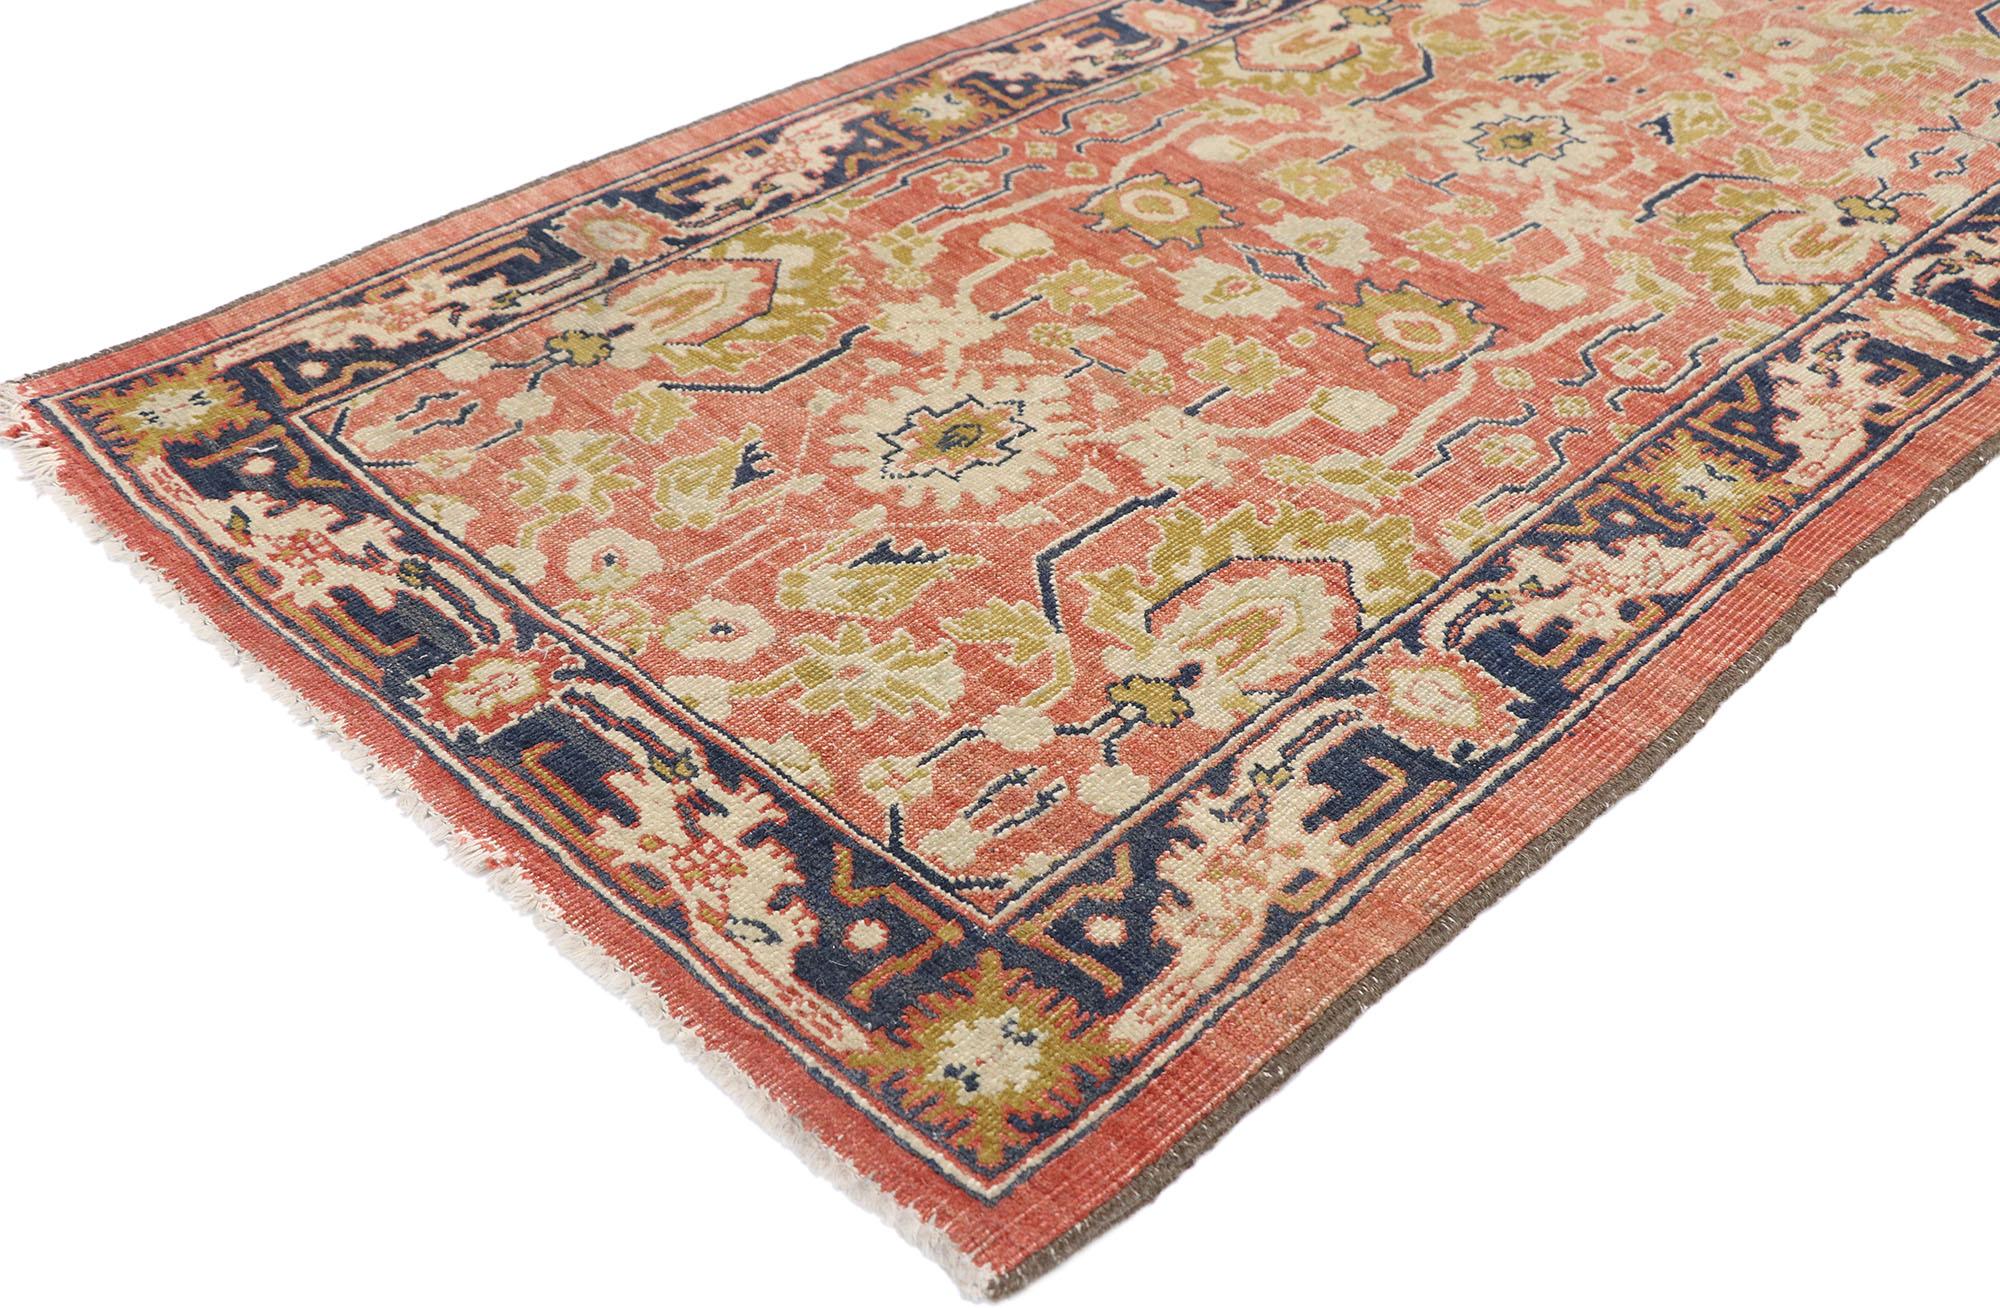 77639 Distressed antique Pakistani runner with Rustic Arts & Crafts style. Warm and inviting with rustic sensibility, this hand-knotted wool distressed antique Pakistani runner will take on a curated lived-in look that feels timeless while imparting